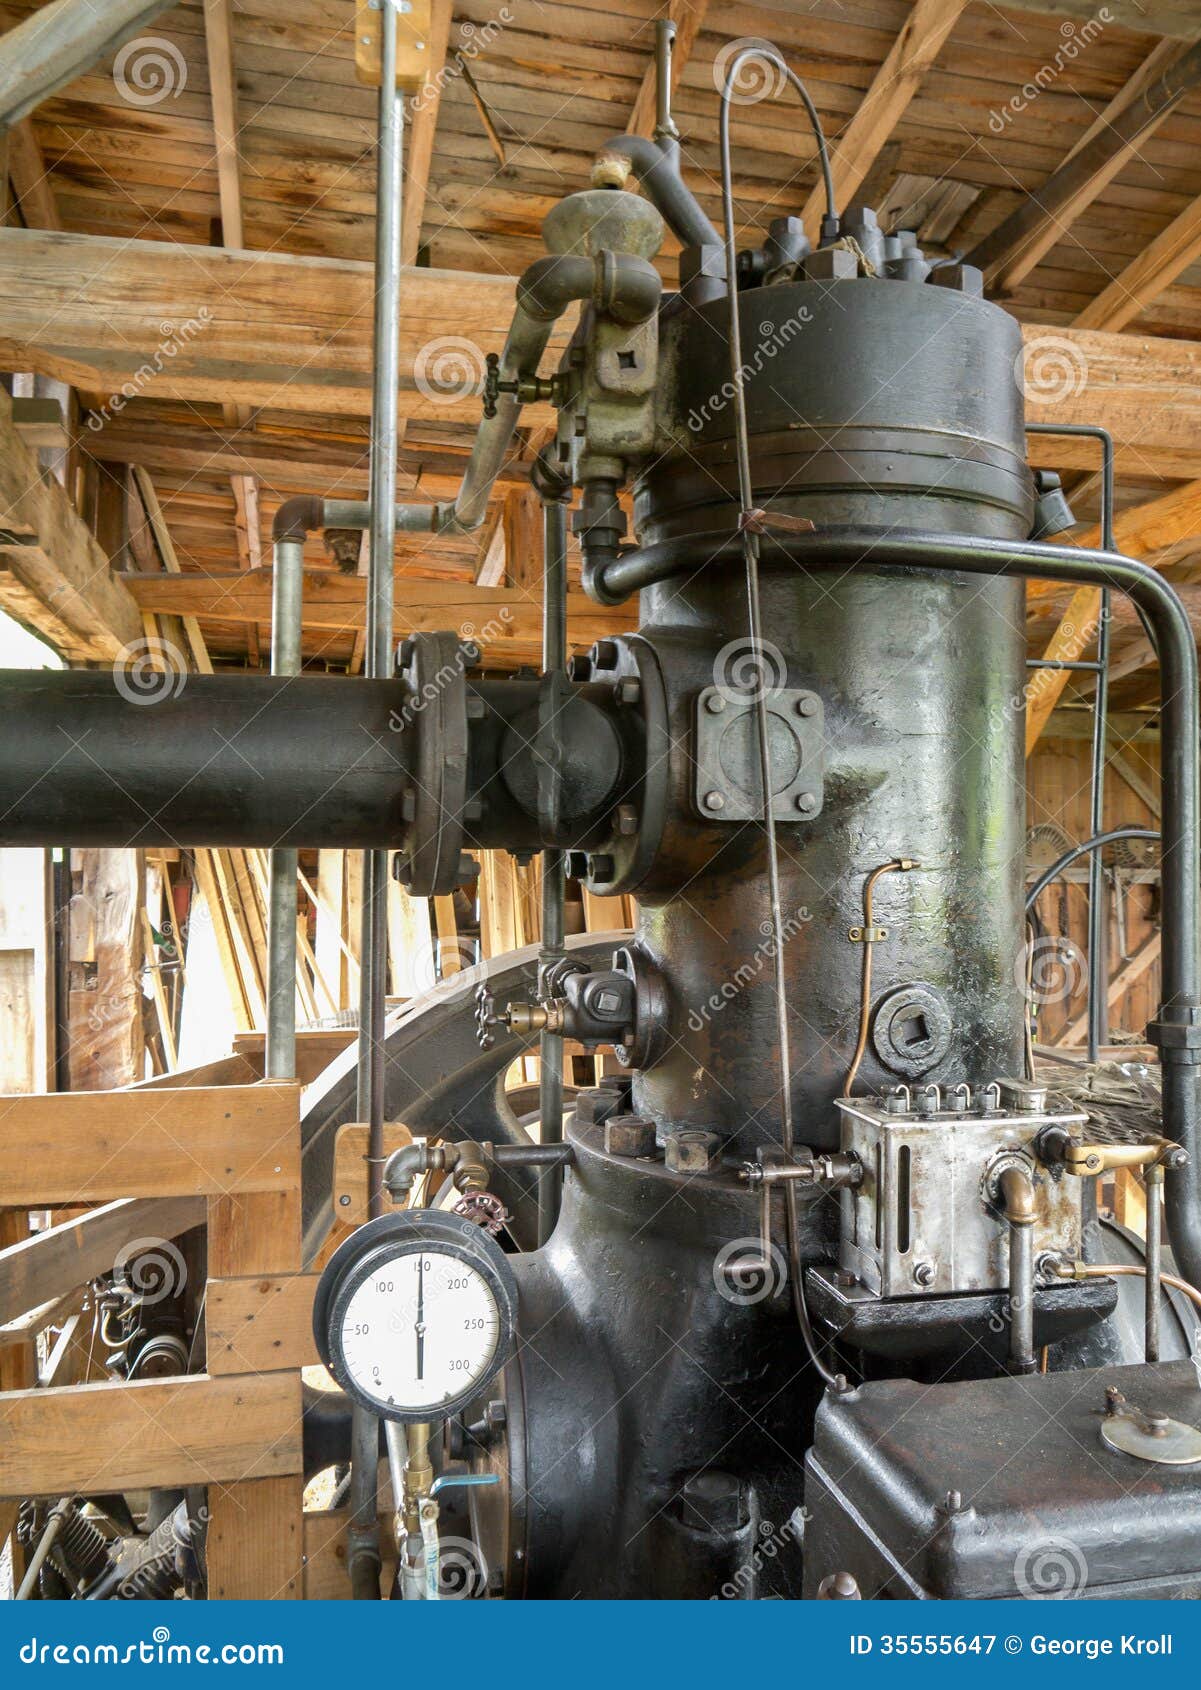 vintage steam motor in an old barn saw mill.